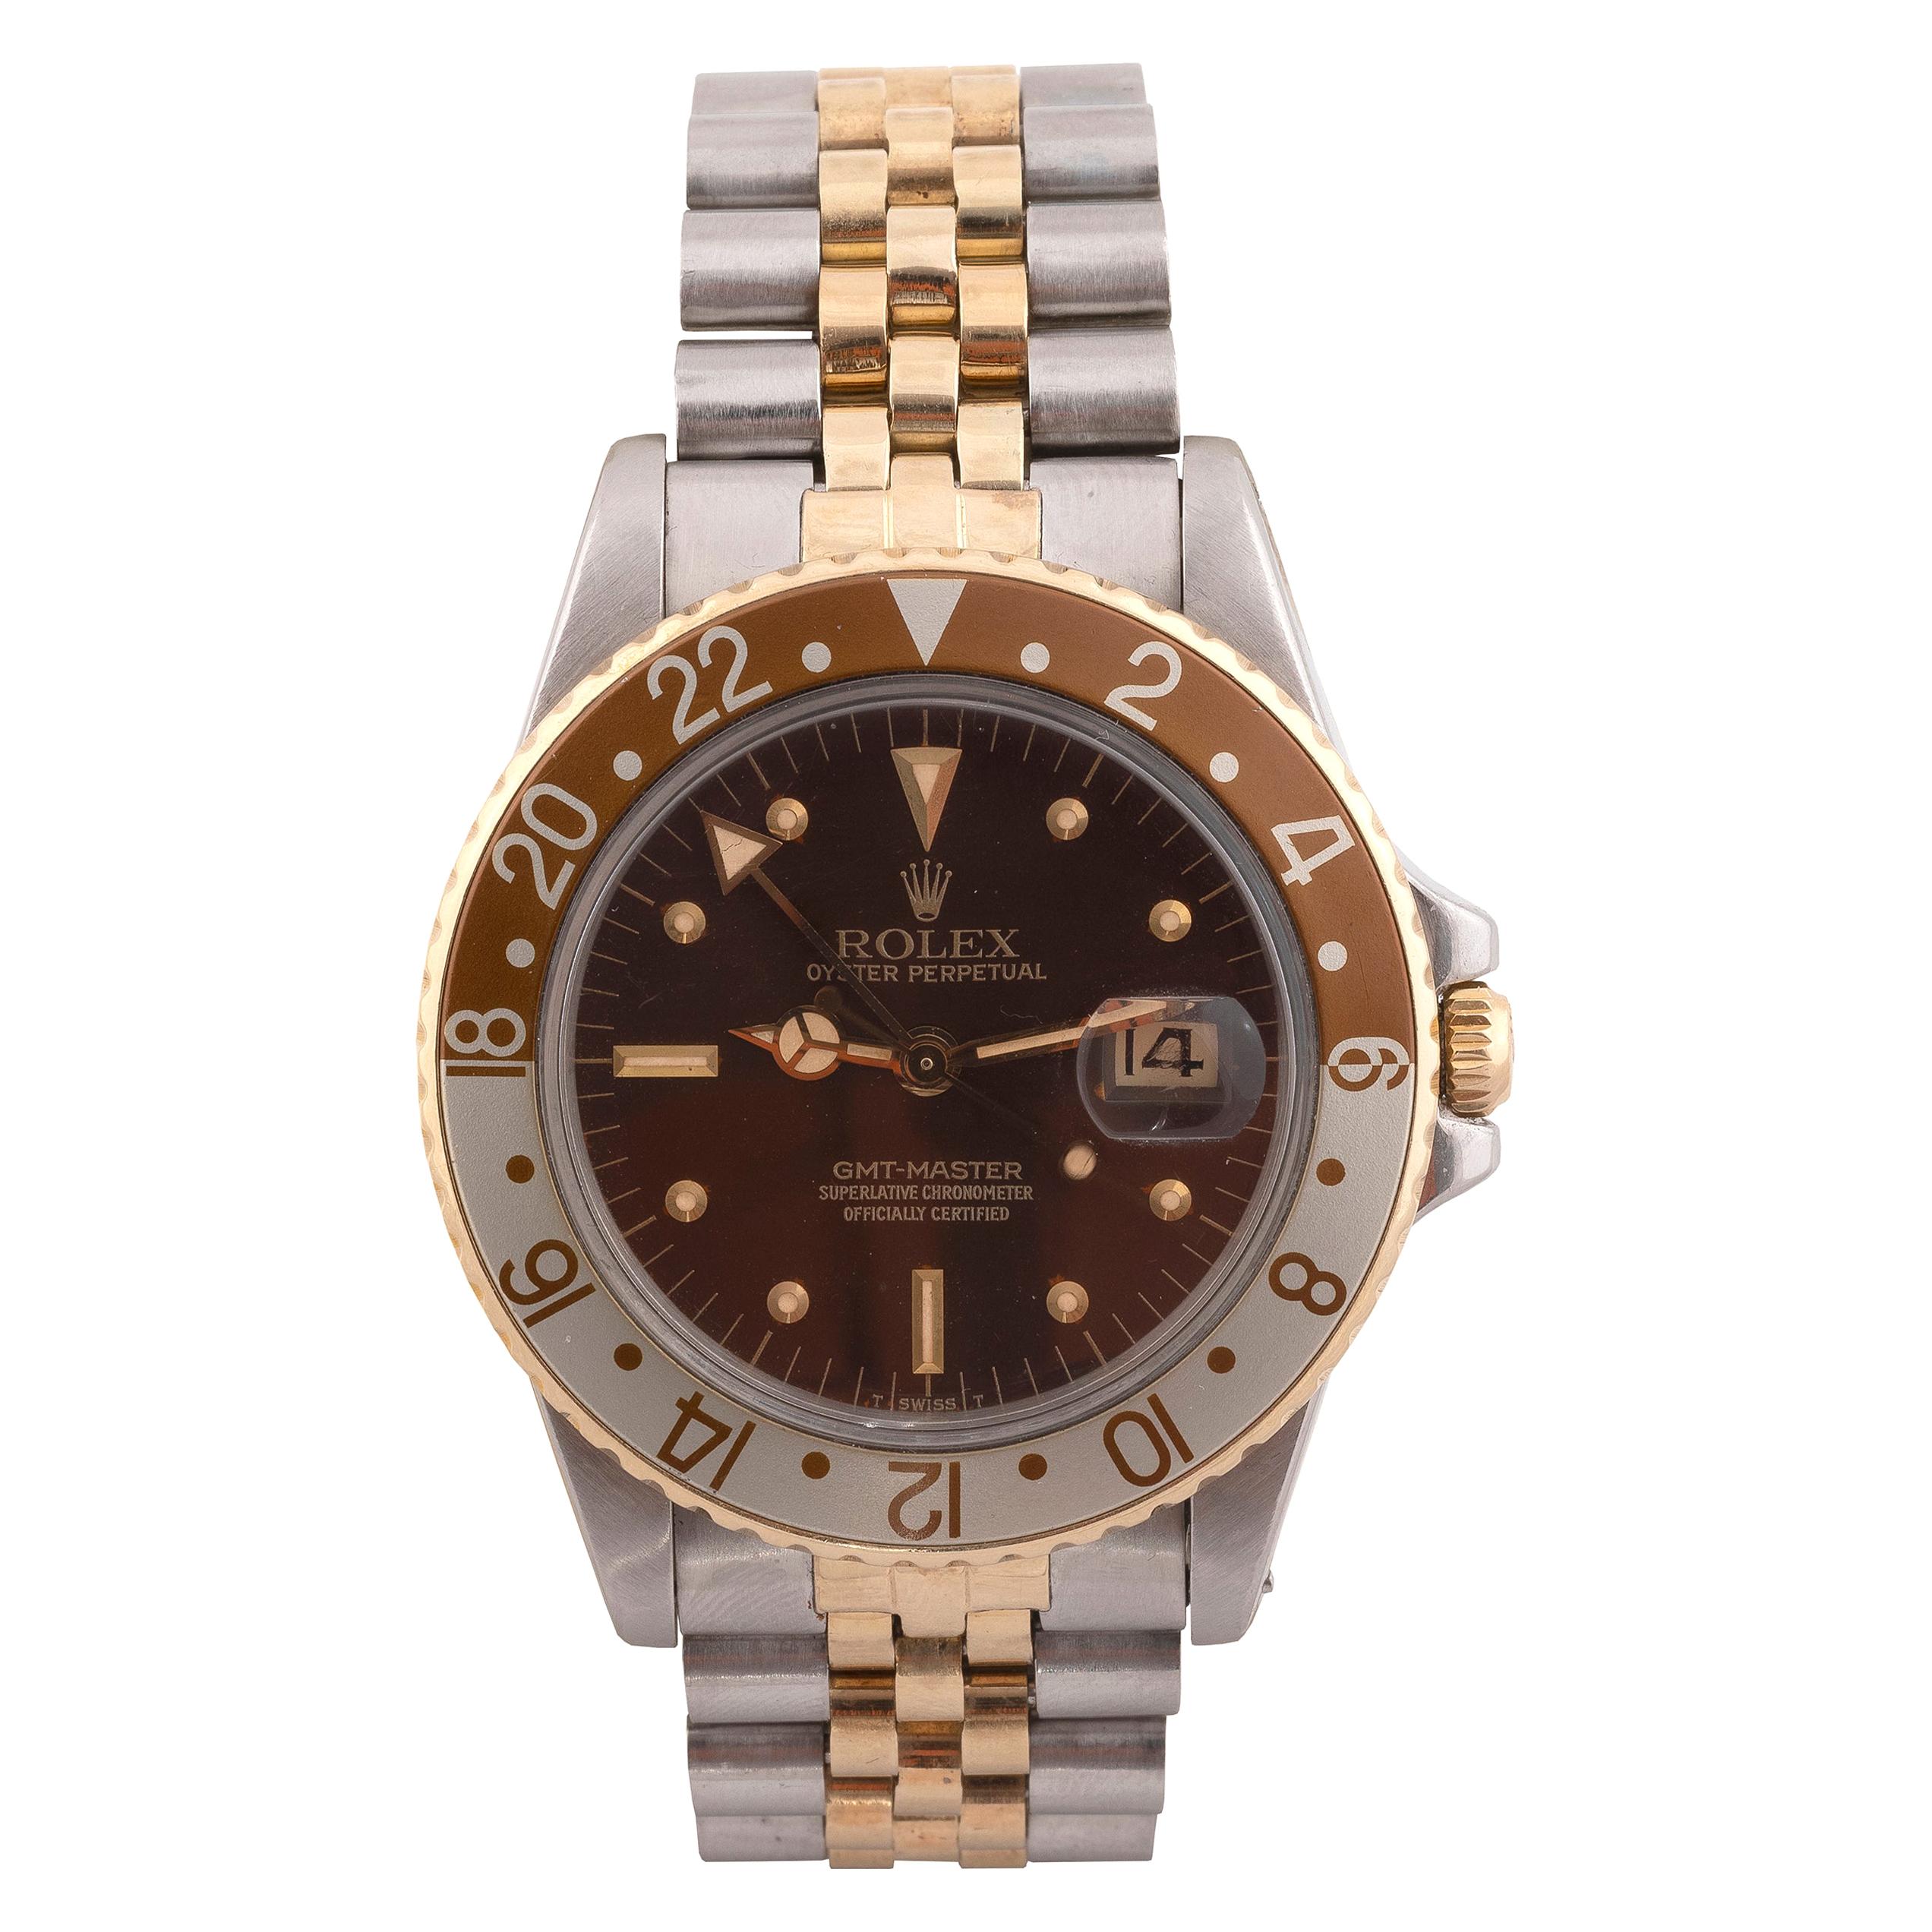 Rolex Ref 16753 GMT-Master Steel and Gold Oyster Perpetual Wristwatch